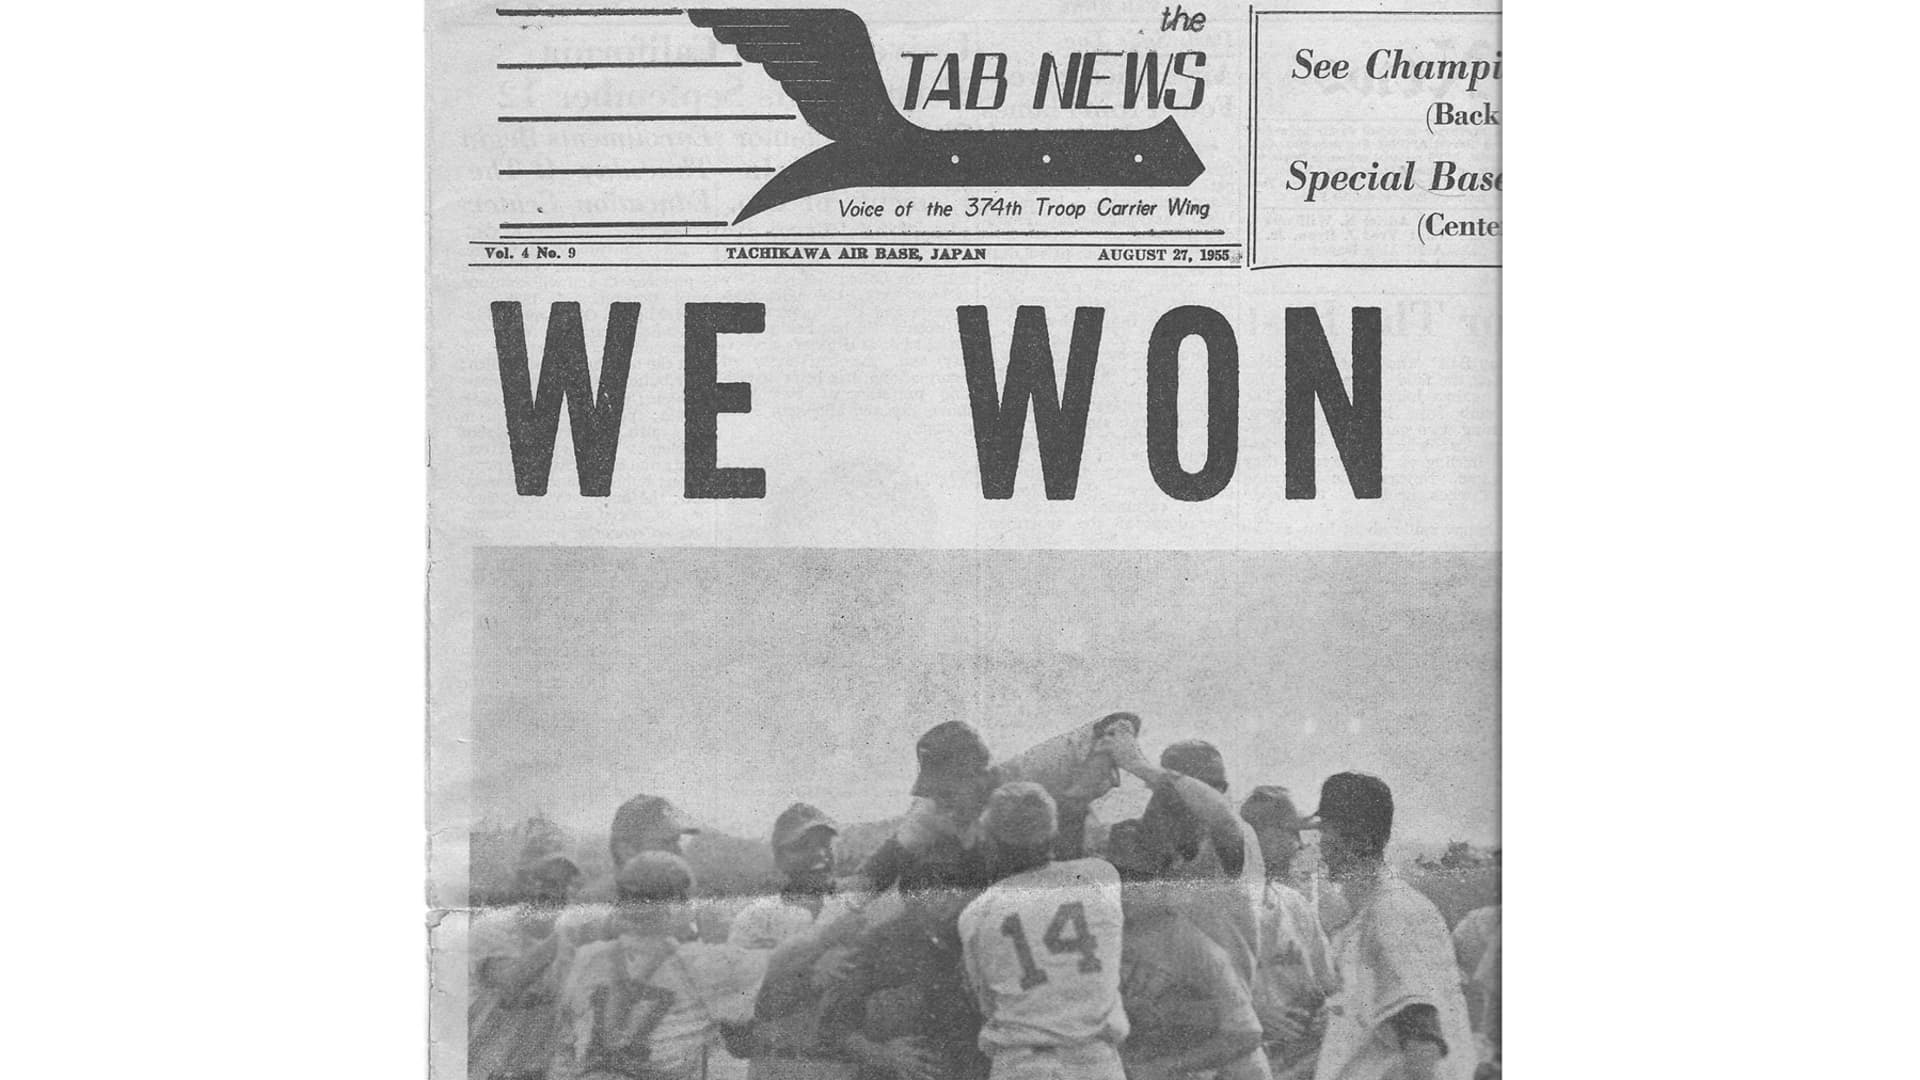 The front page of the Tachikawa Air Base newspaper on Aug. 27, 1955.